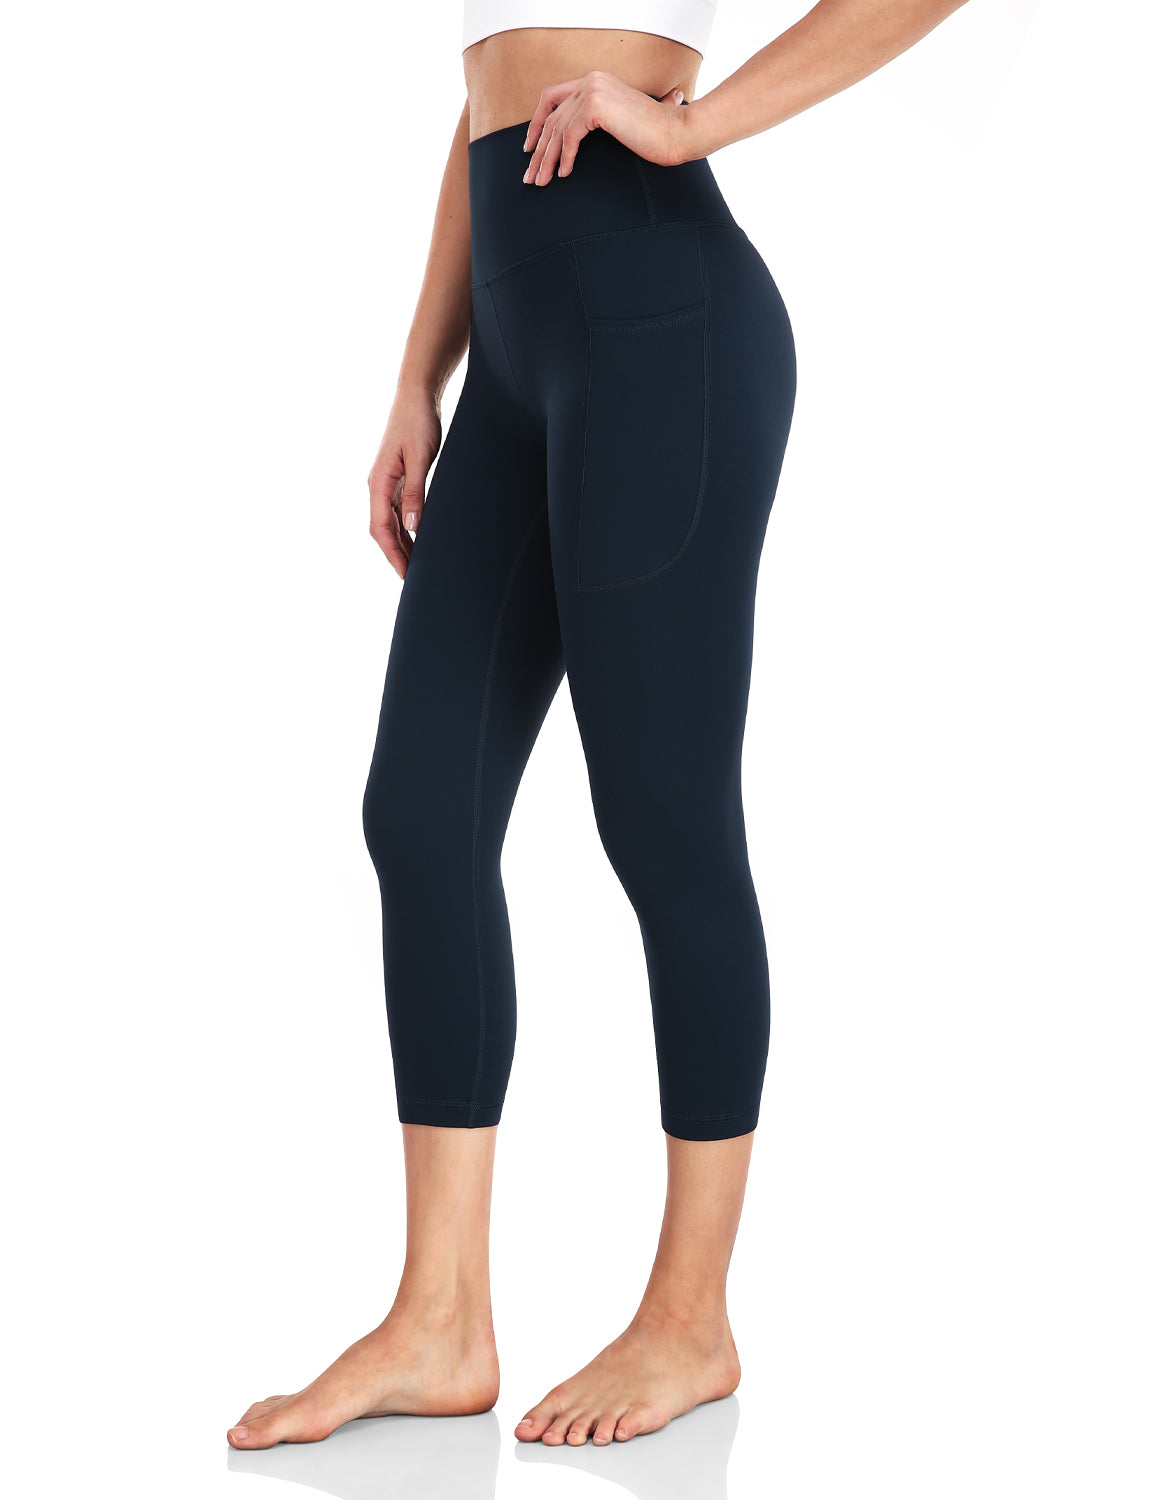  HeyNuts High Waist Athletic Leggings with Drawstring for Women,  Compression Workout Yoga Cropped Pants 21'' True Navy XXS(00) : Clothing,  Shoes & Jewelry